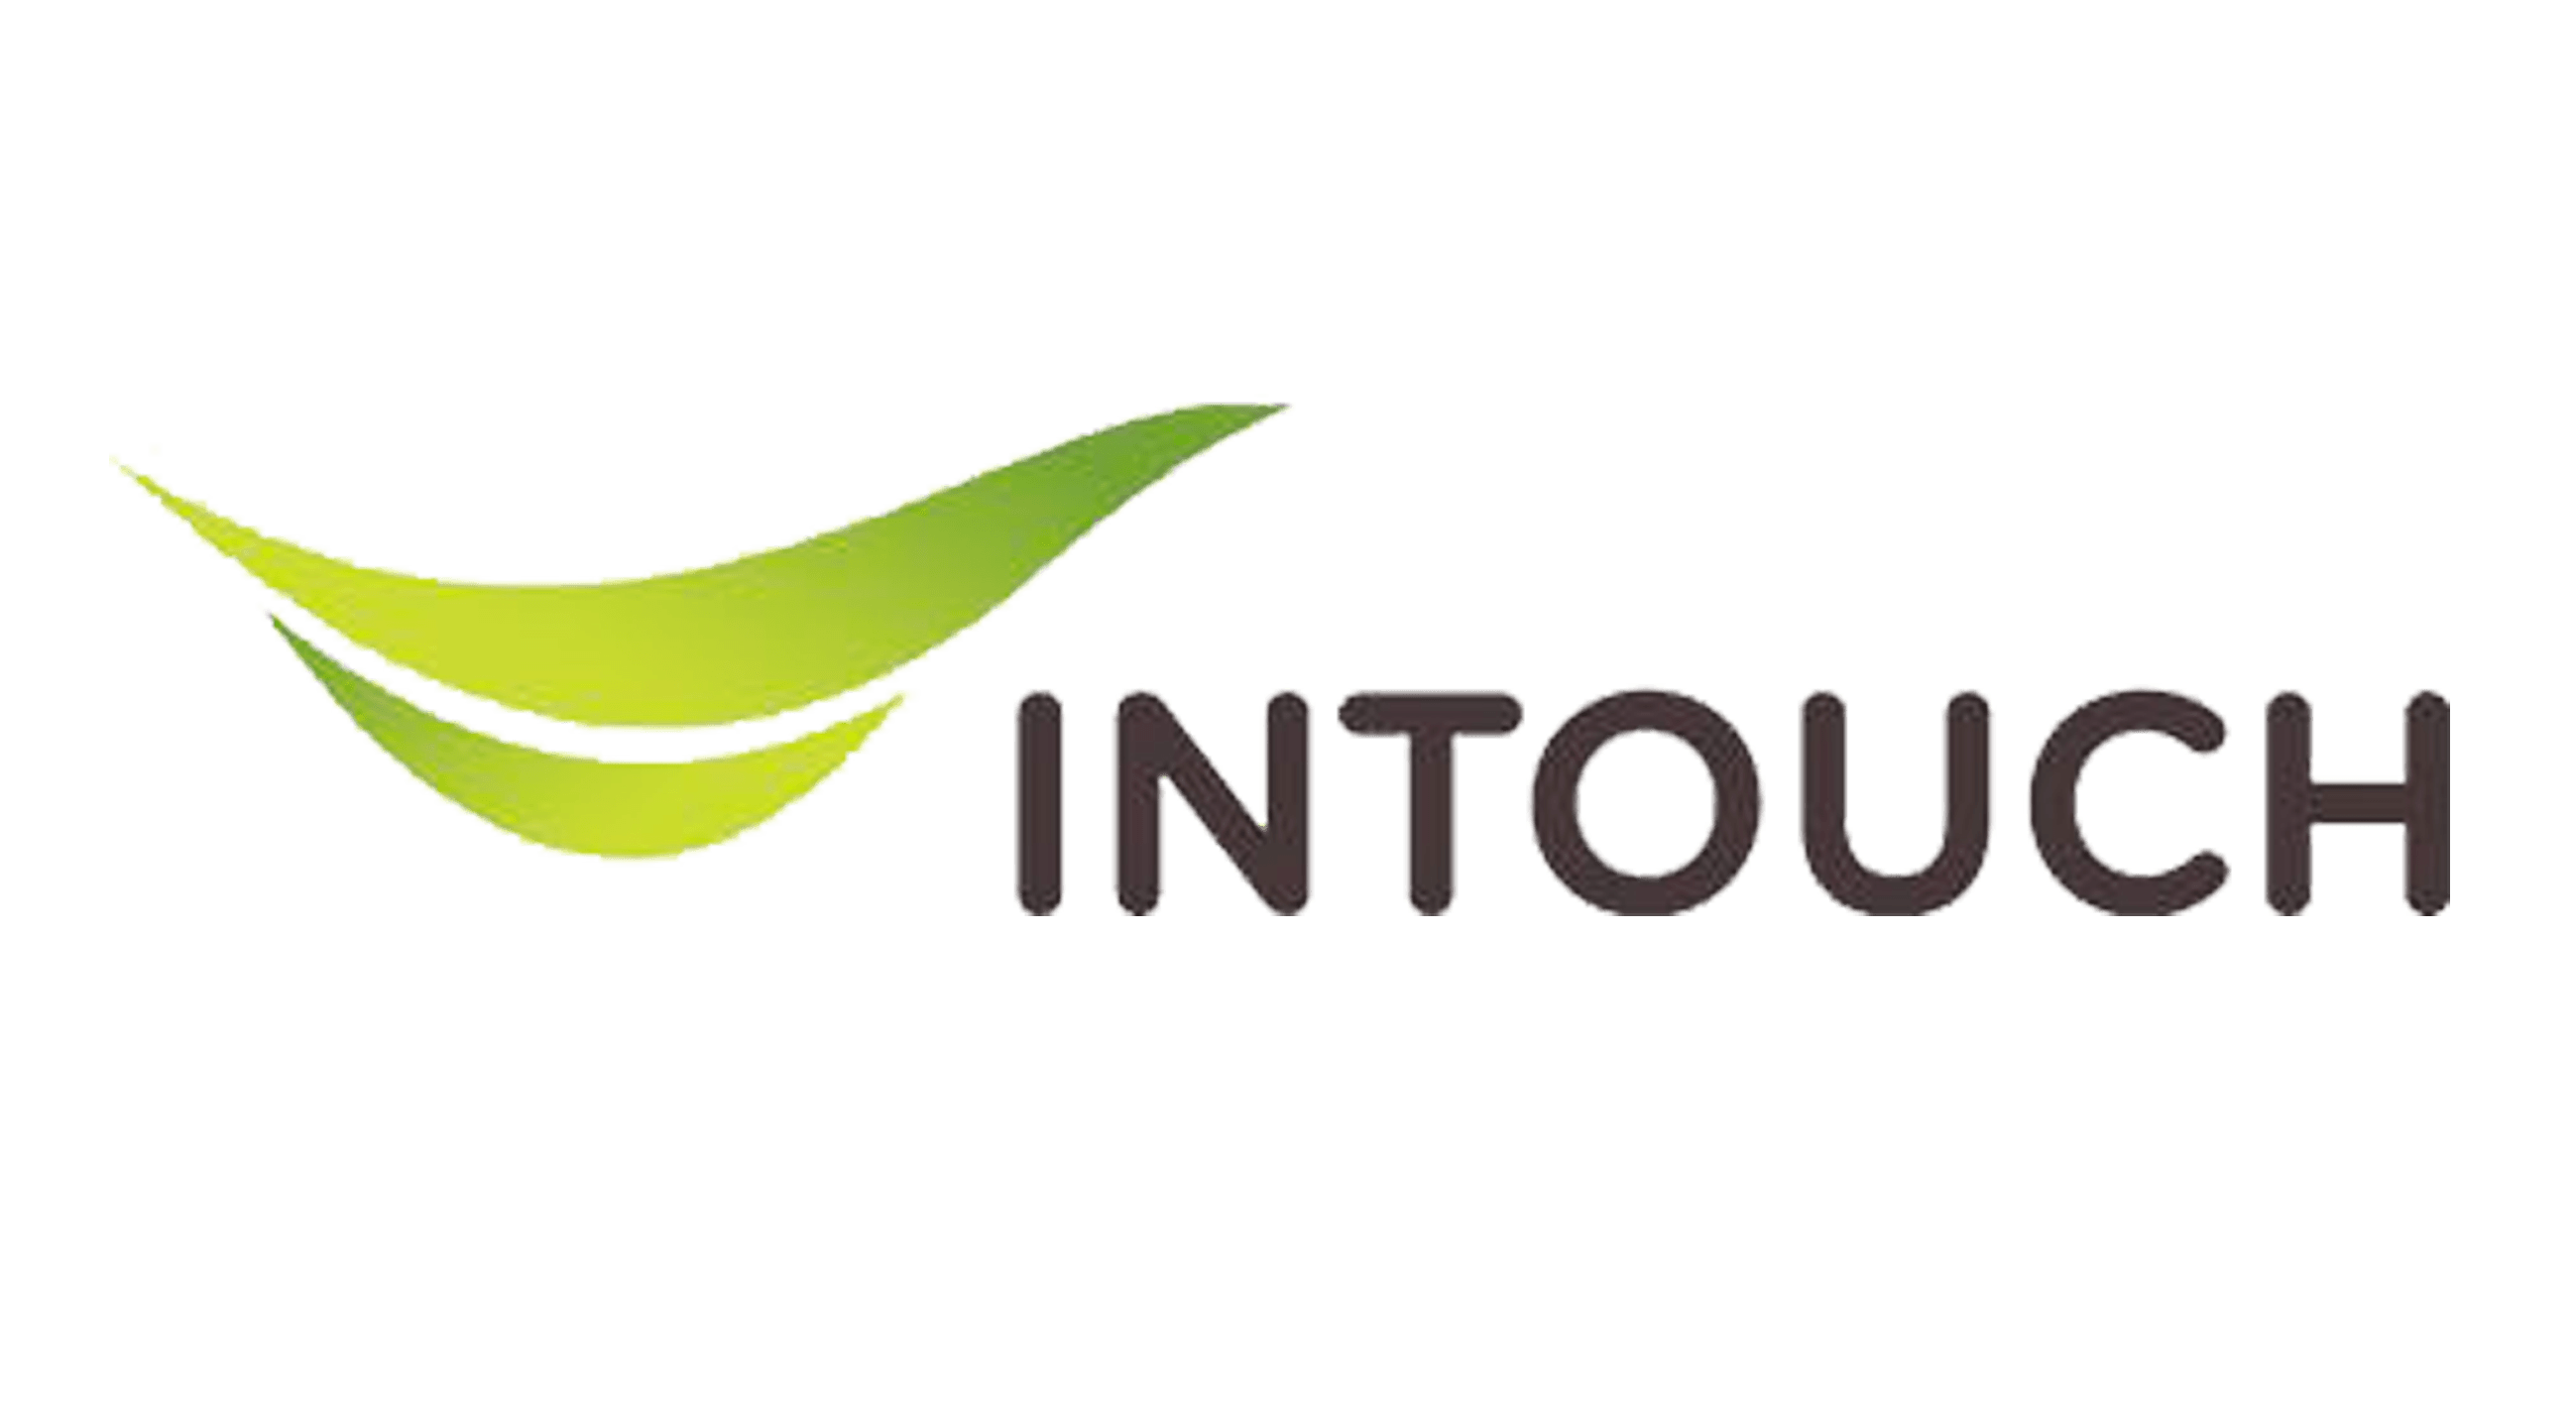 Intouch Logo - Intouch Logos